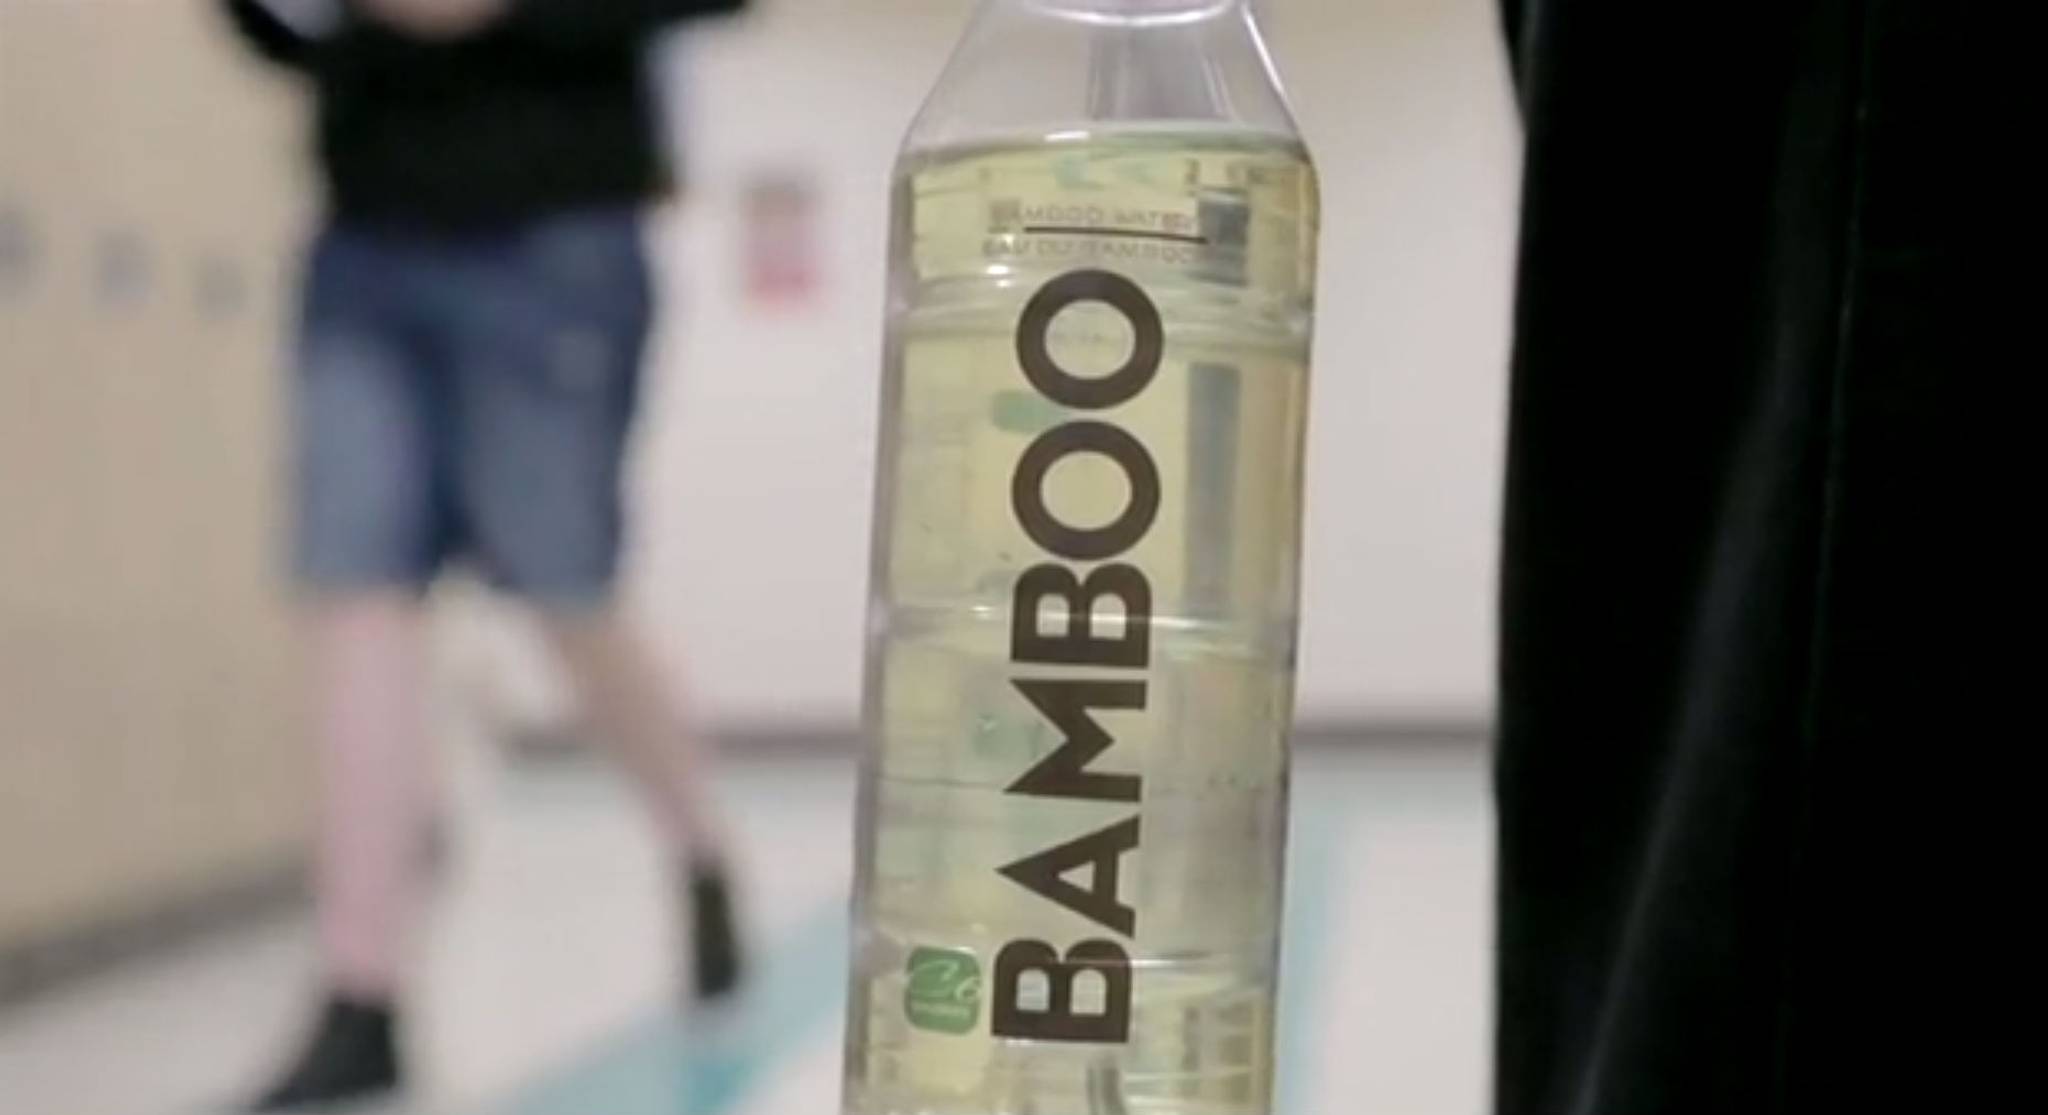 Bamboo water could be the next super drink